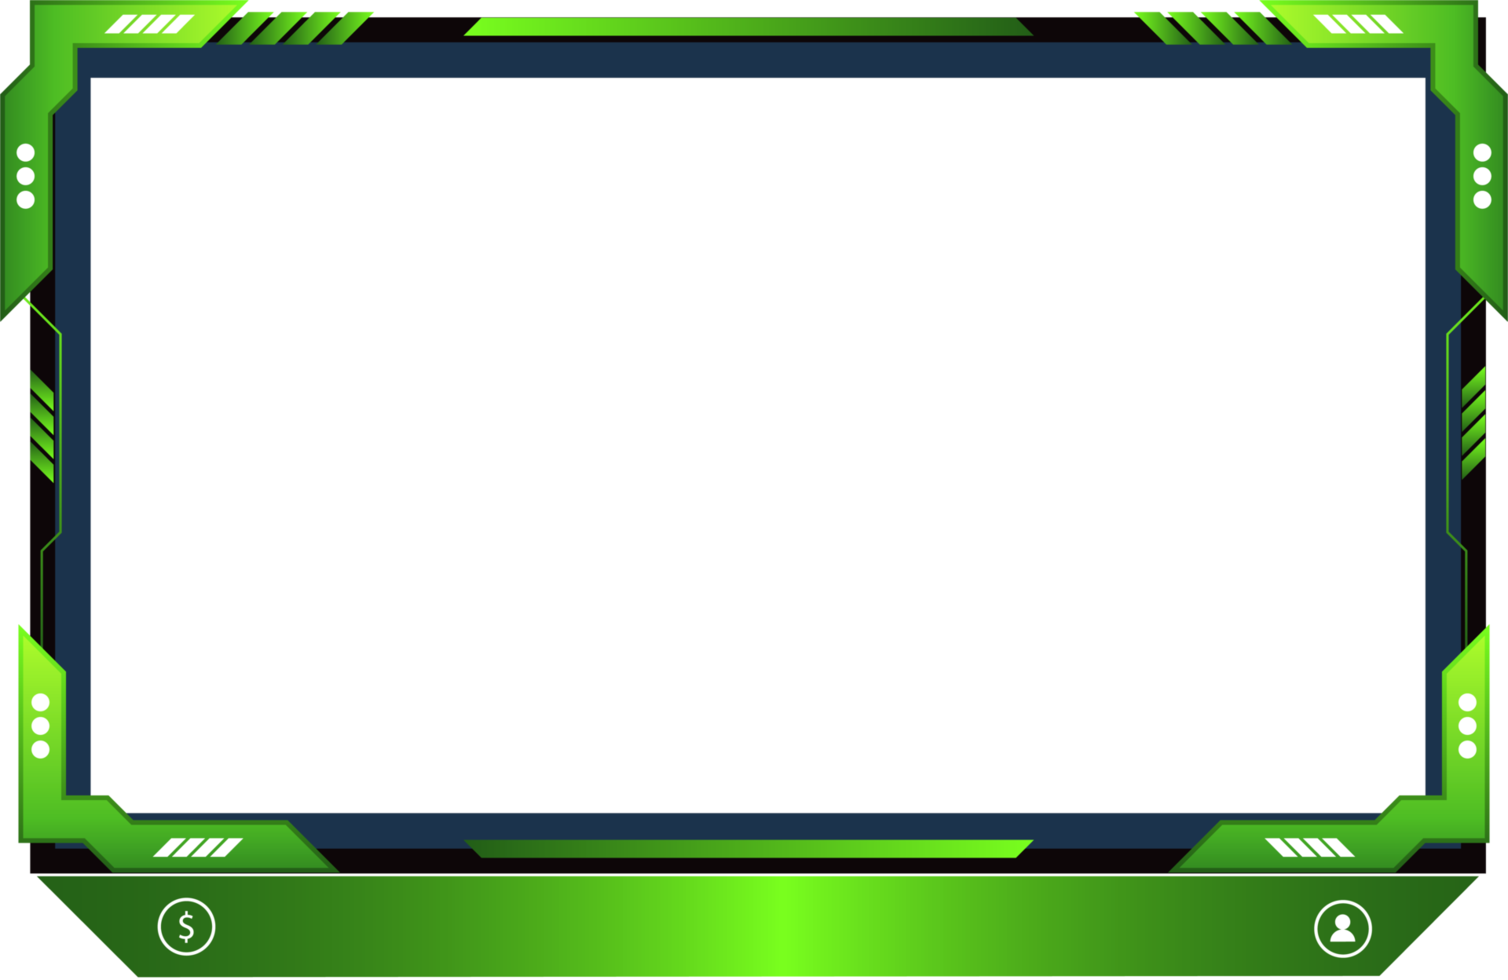 Green Live stream overlay design with offline screen section and colorful buttons. Live streaming overlay PNG for online gamers. Futuristic gaming overlay design for screen panels.